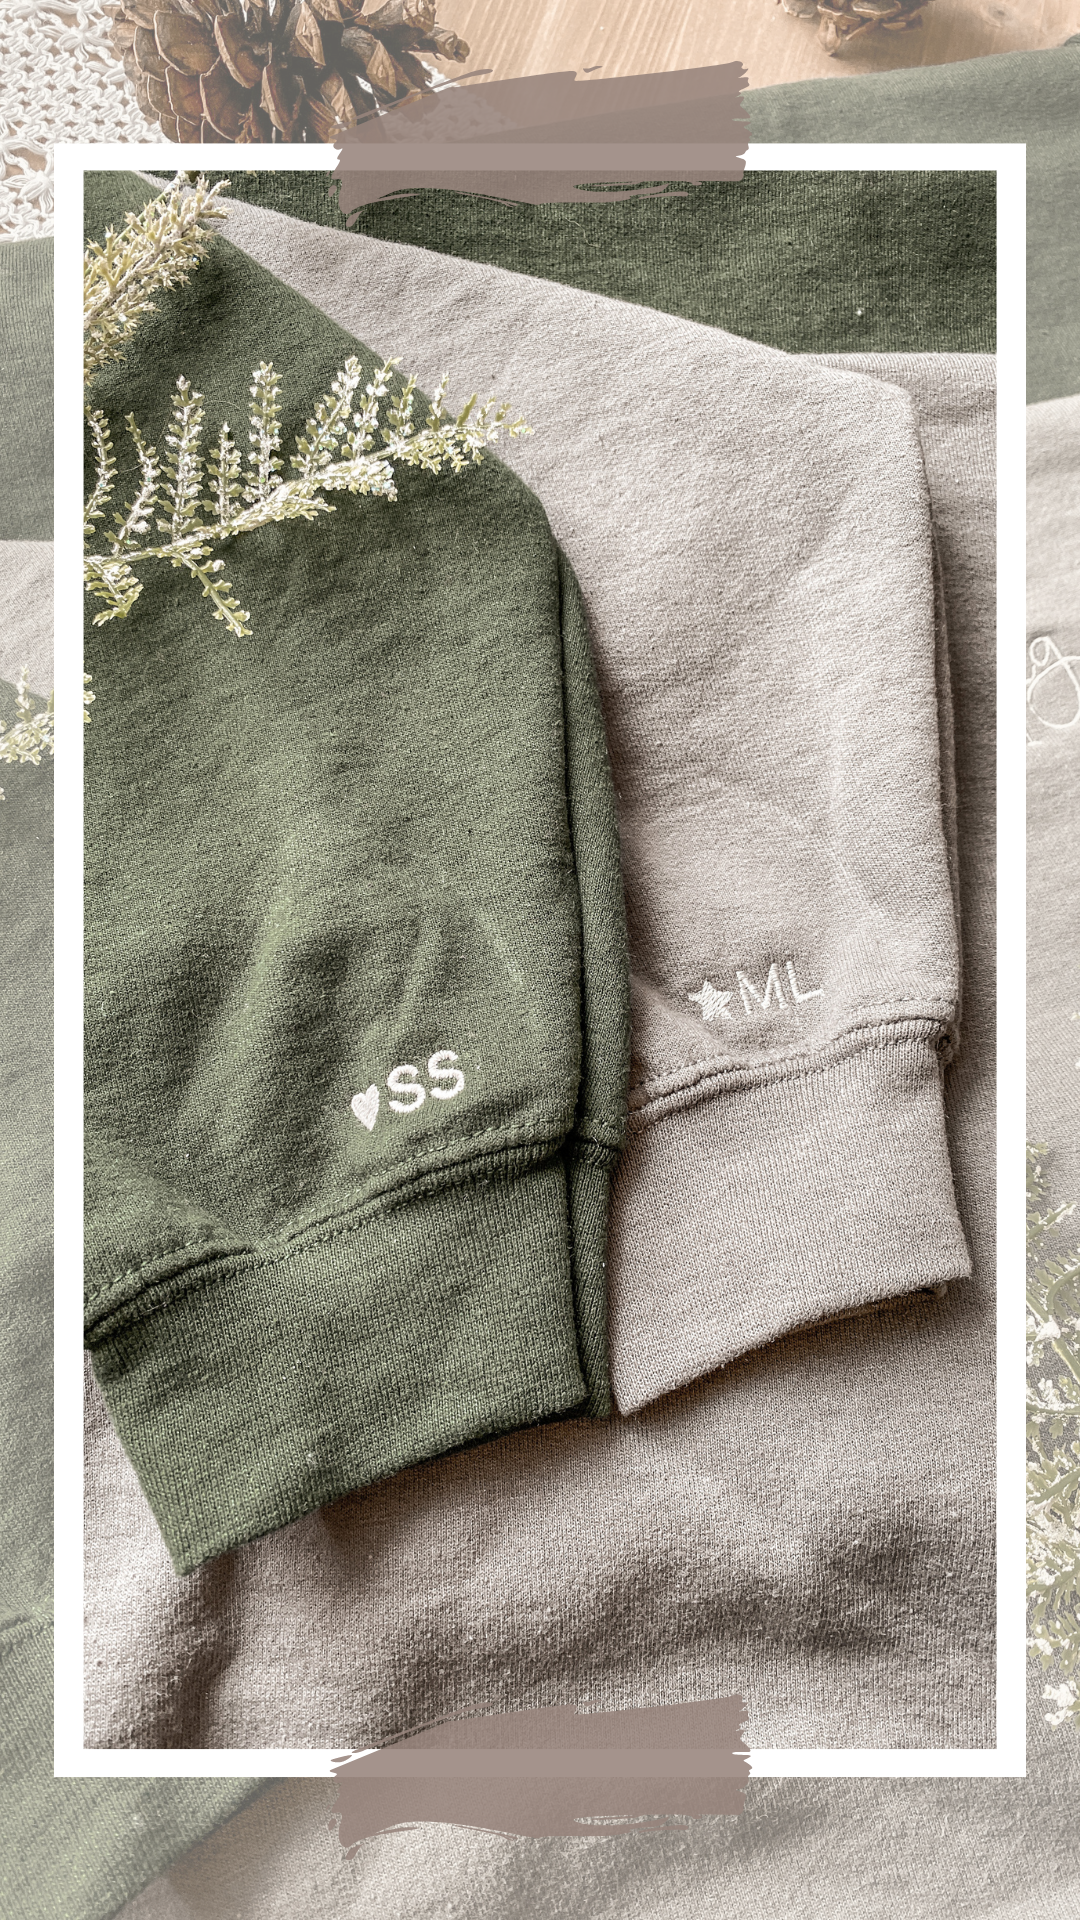 Custom Initials on the Sleeve | Include this listing in a purchase of your crewneck/jacket